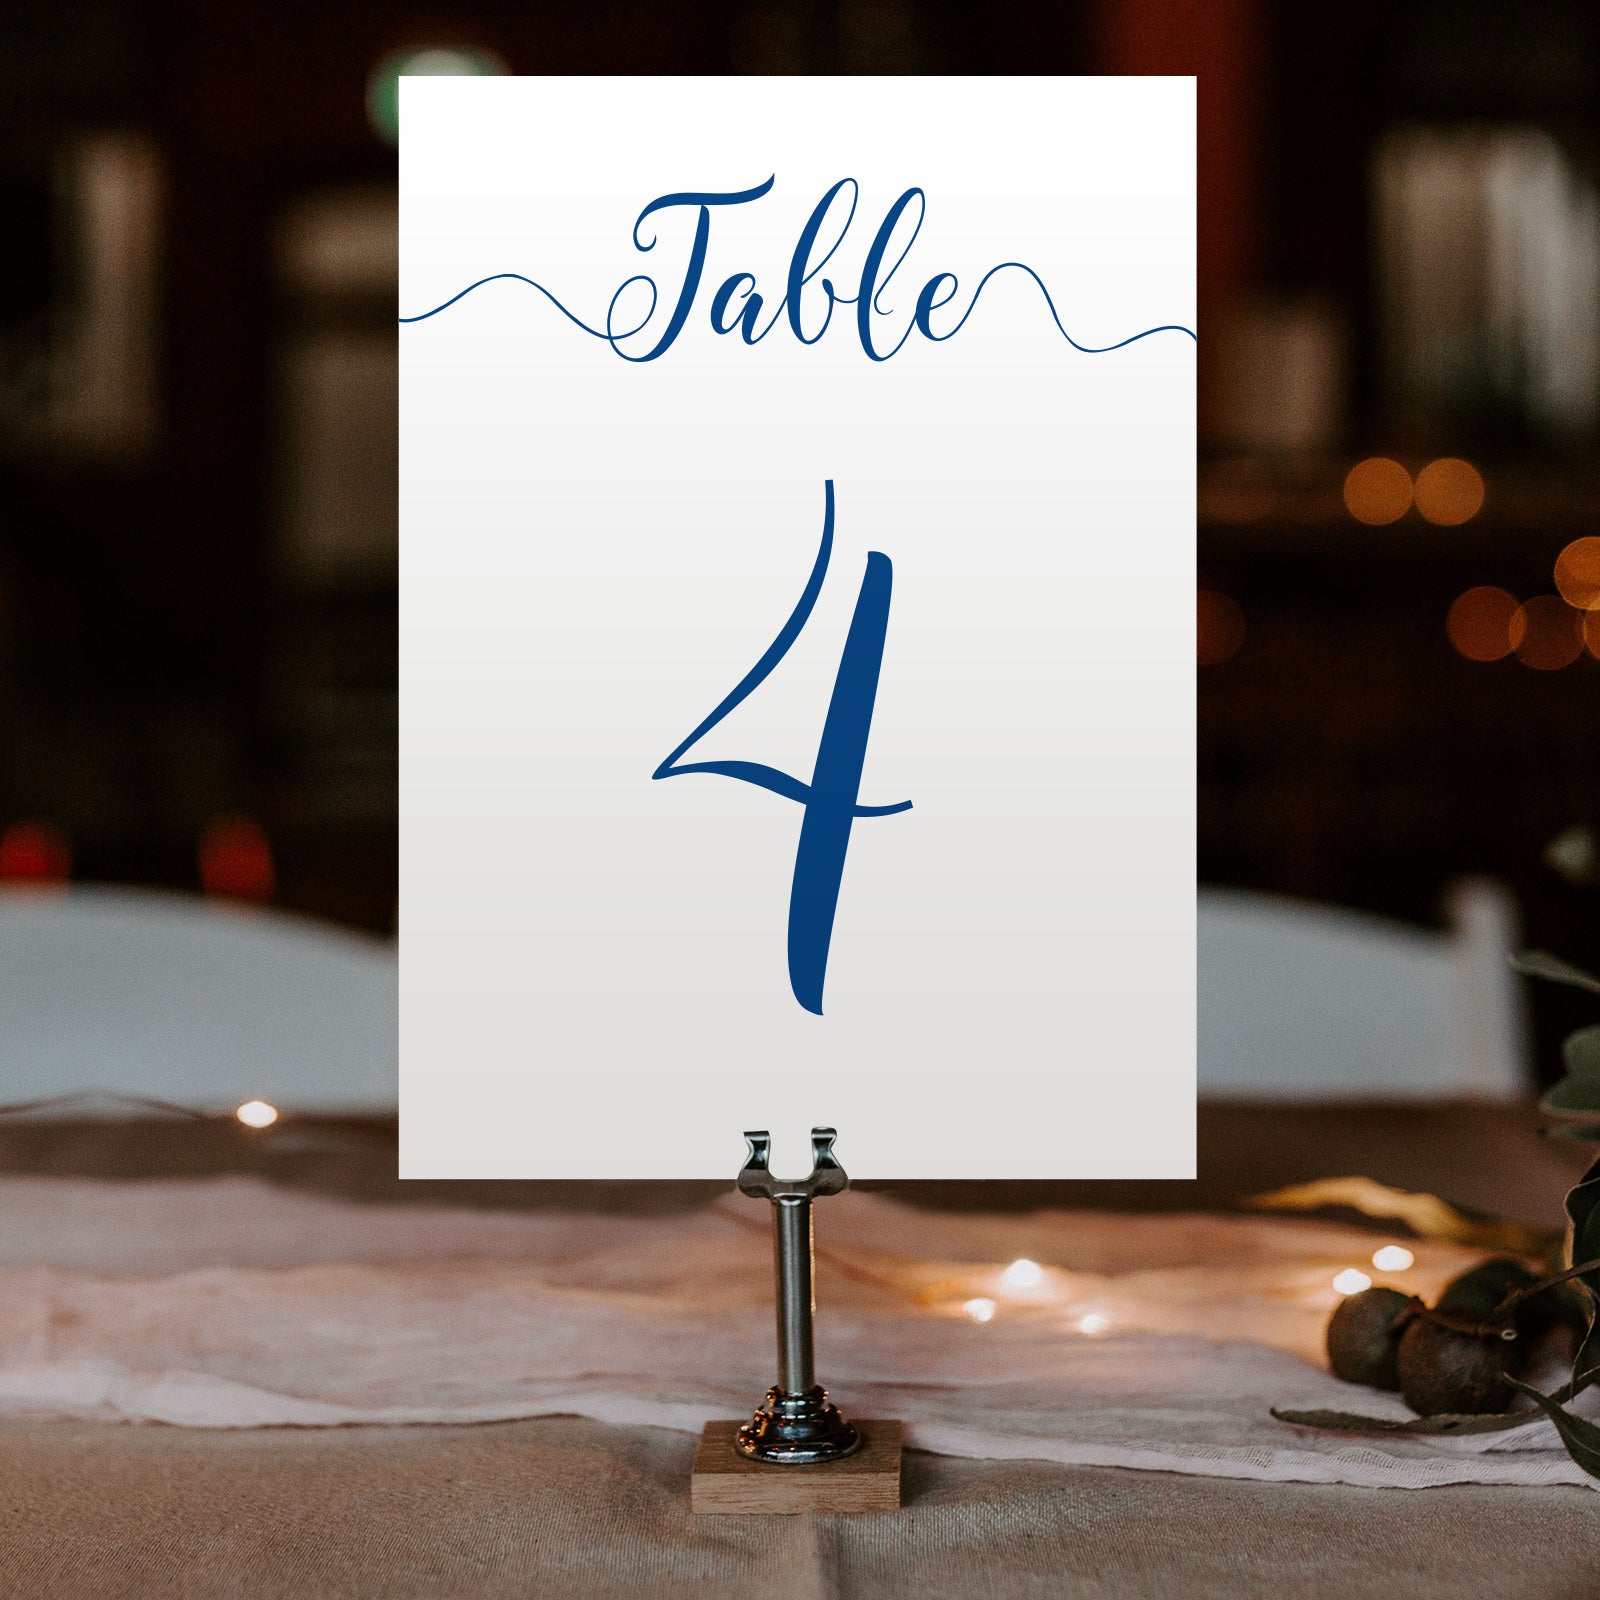 royal blue table number on a wedding table at an evening reception